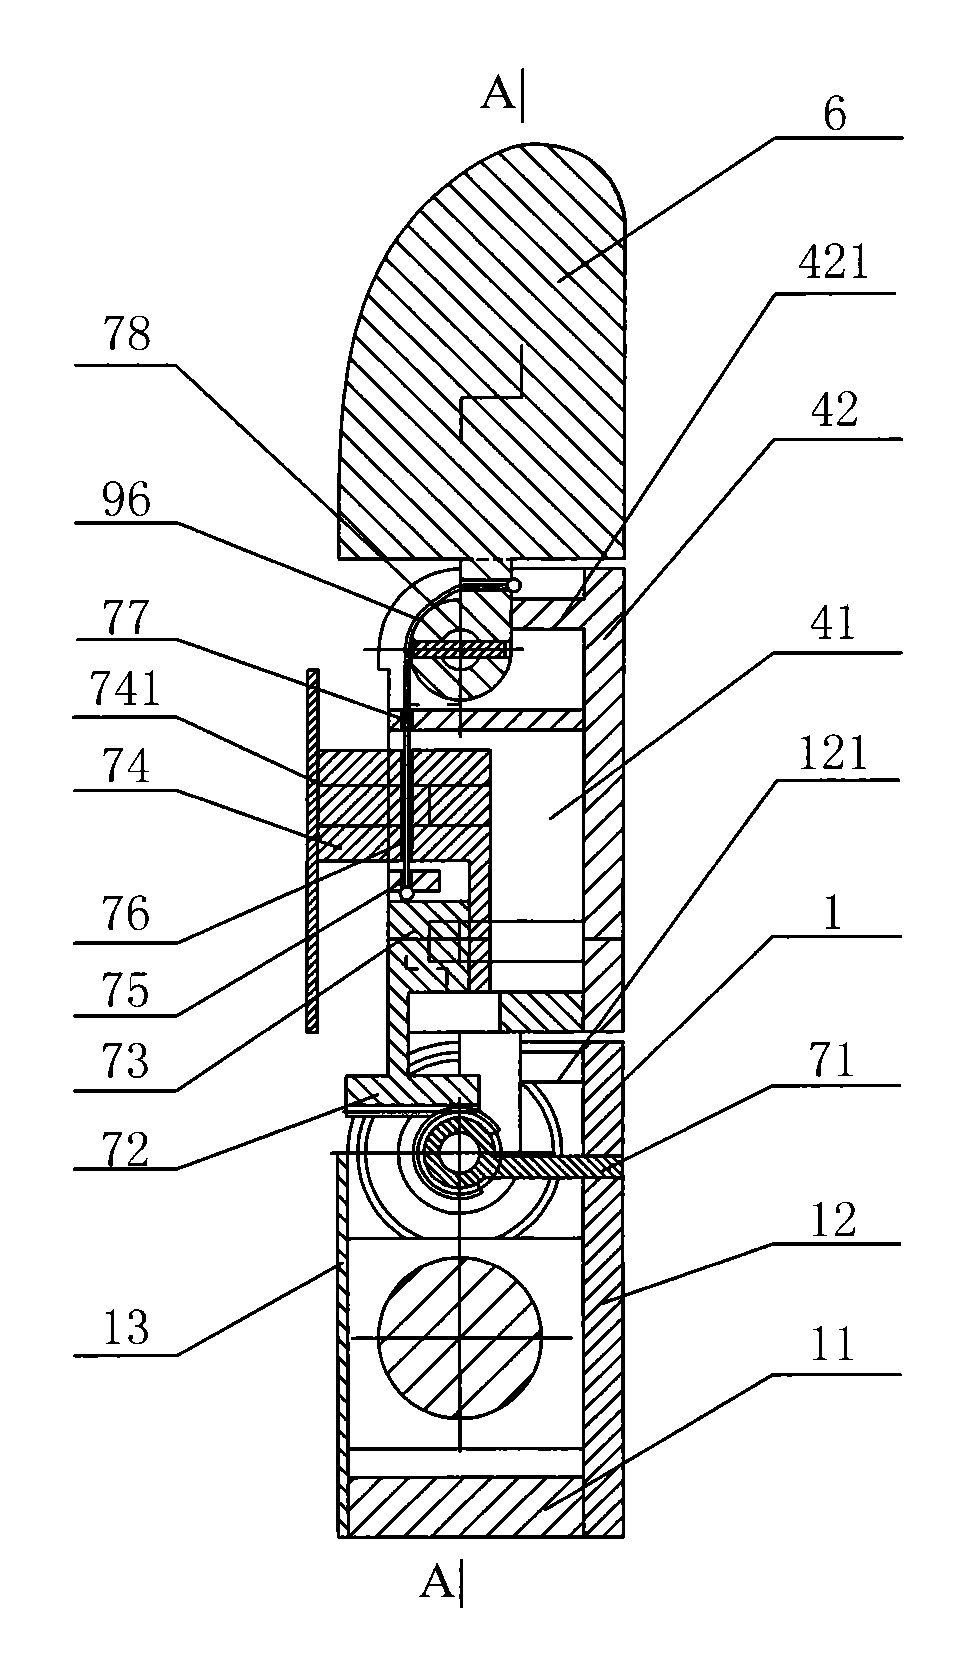 Flexible part and rack type parallel finger device integrating coupling and under-actuation